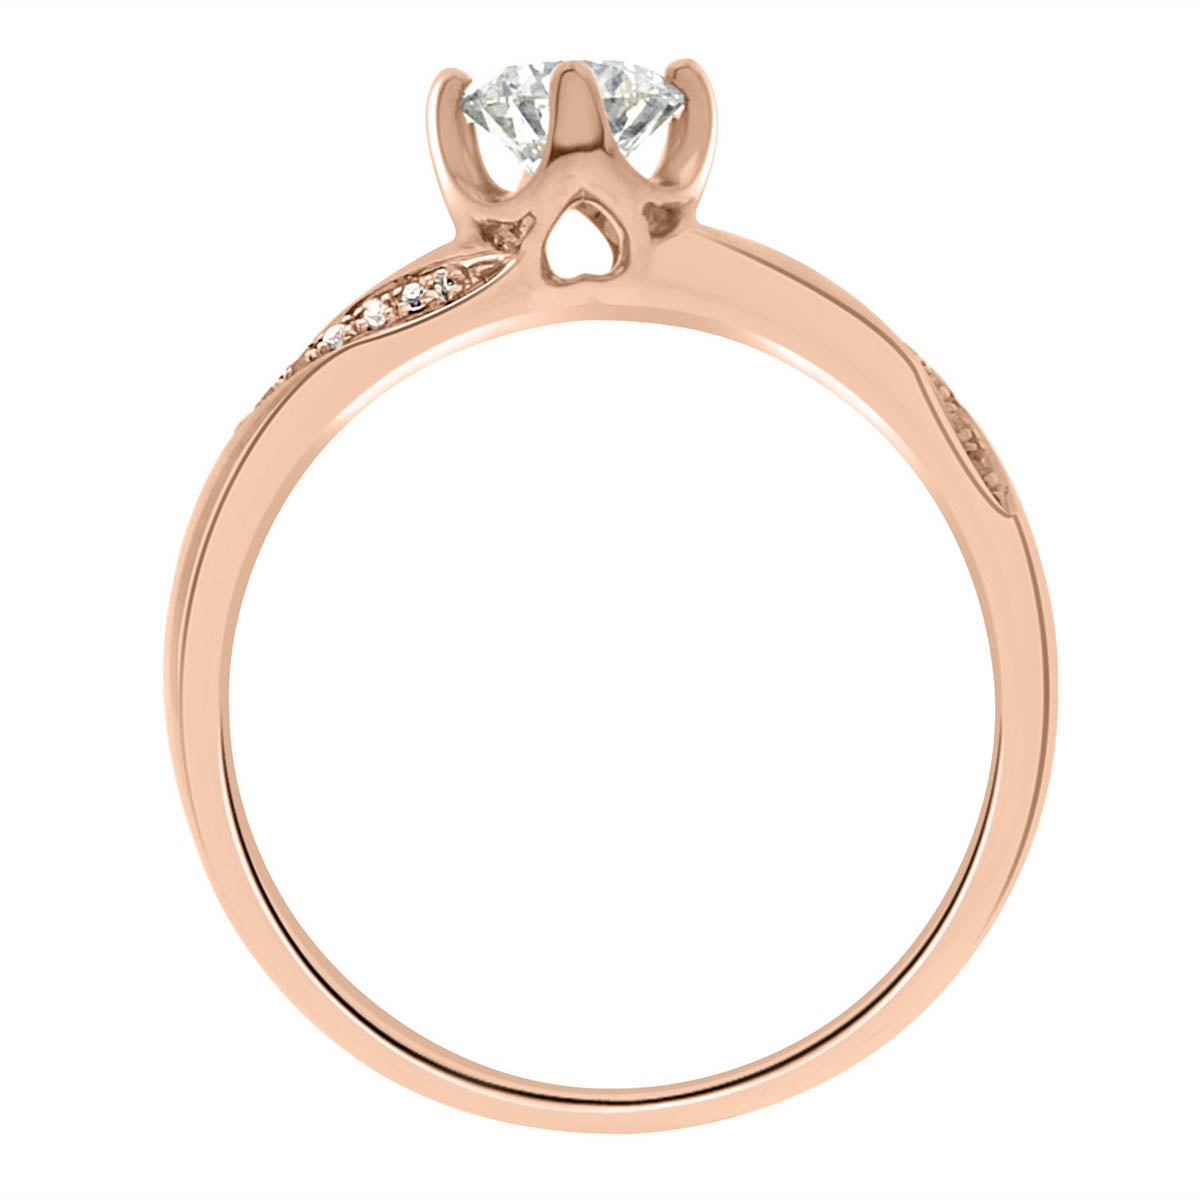 Crossover Band Engagement Ring made from rose gold standing vertically